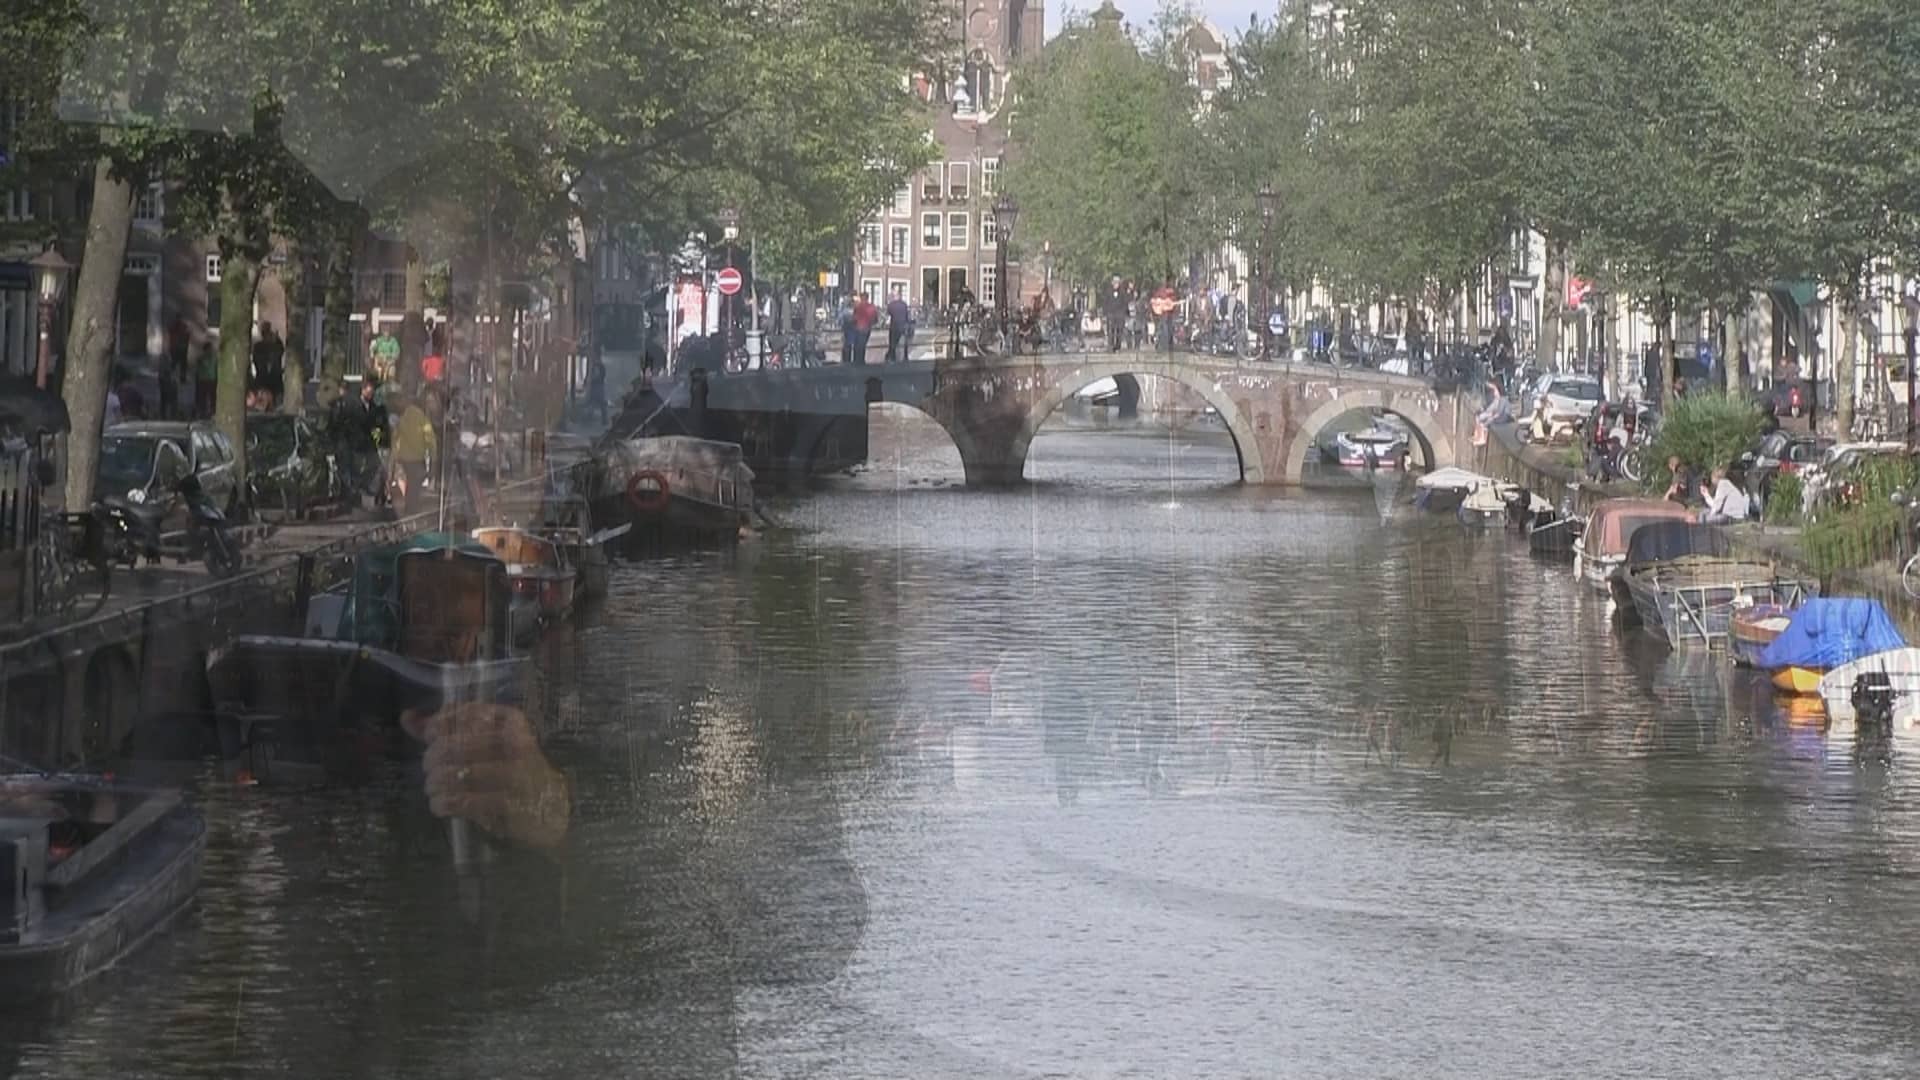 An image of a canal in Amsterdam.